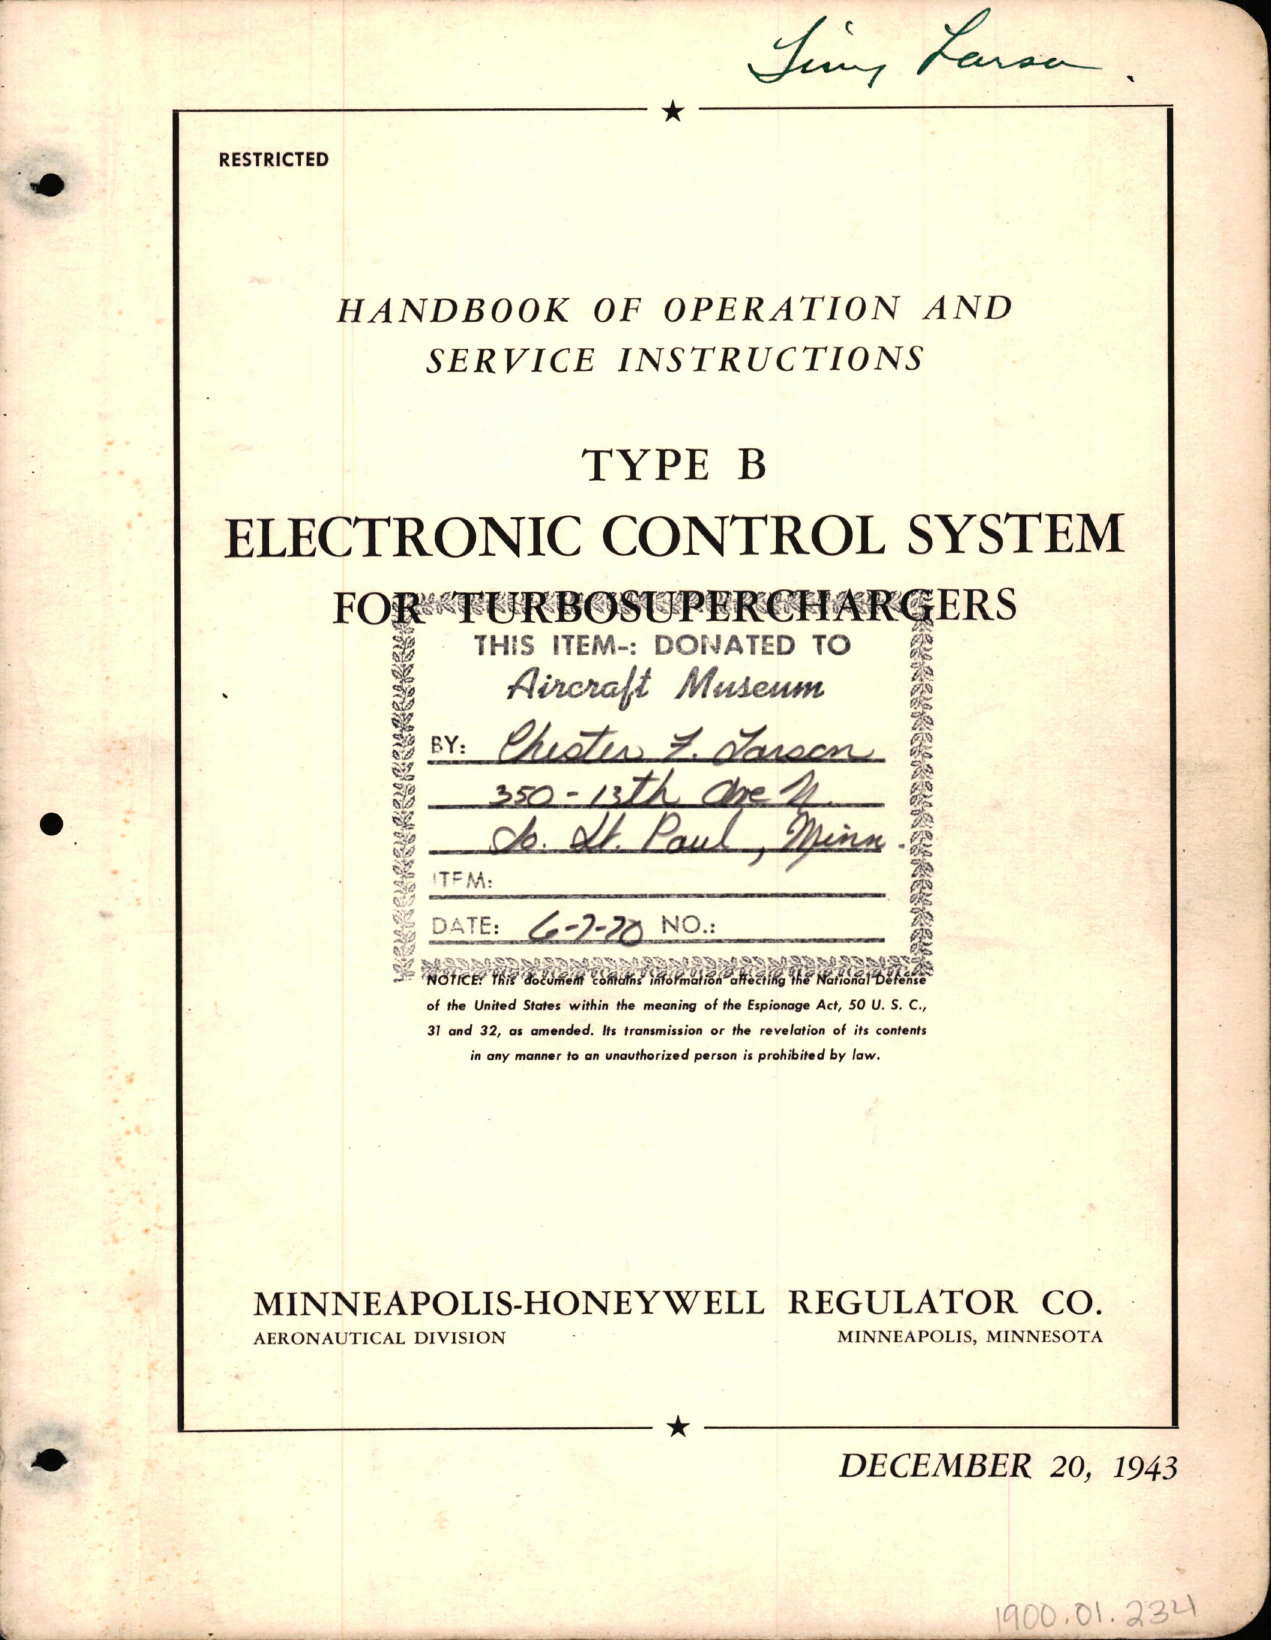 Sample page 1 from AirCorps Library document: Operation and Service Instructions for Electronic Control System Turbosuperchargers Type B